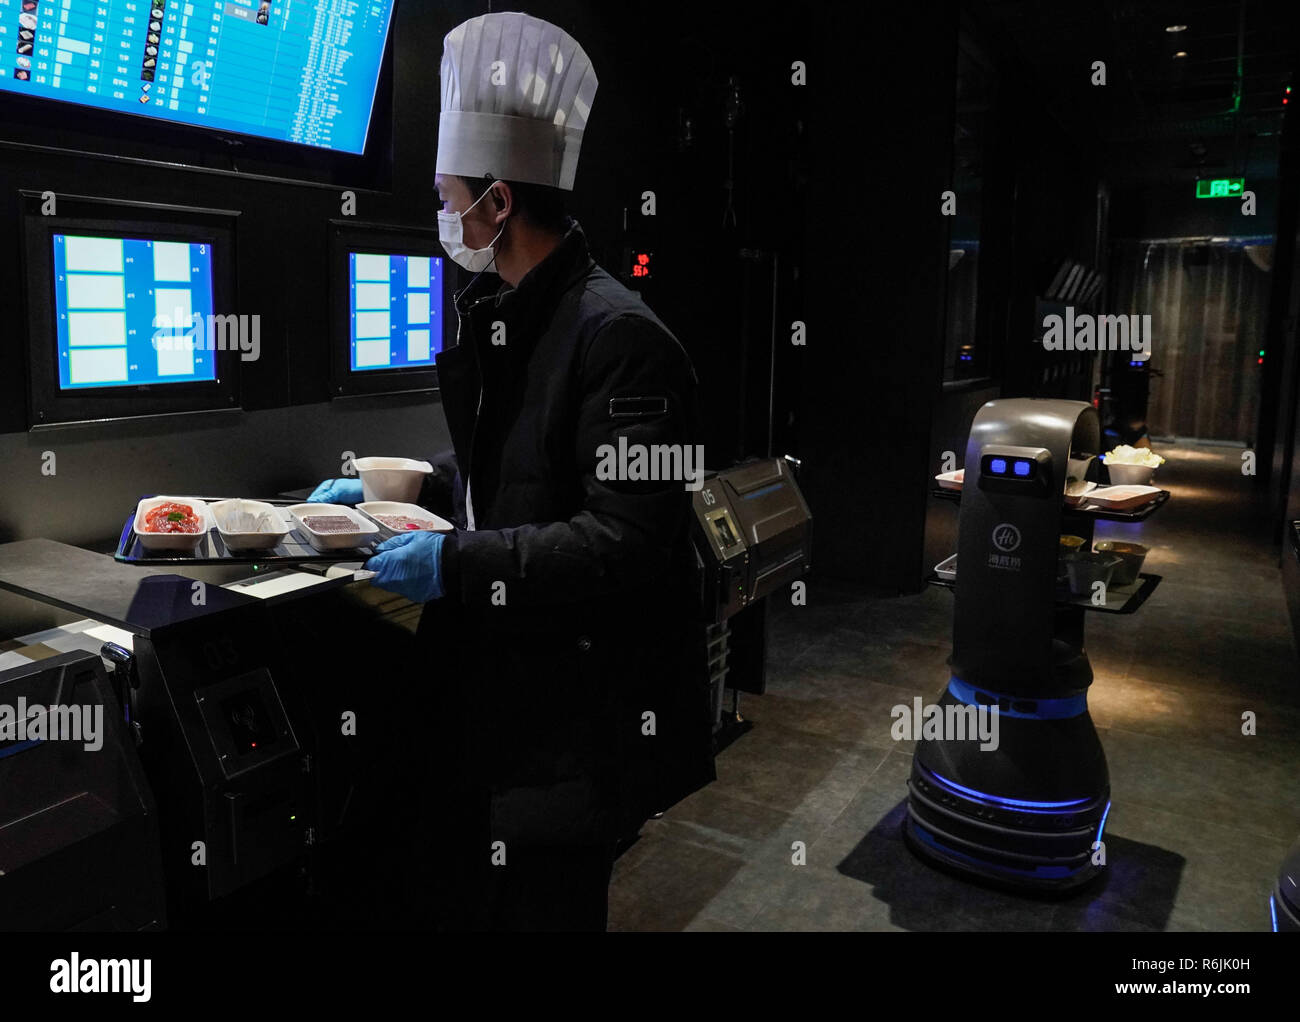 Beijing, China. 5th Dec, 2018. A delivery robot and a waiter work at the kitchen of a hot pot restaurant in Beijing, capital of China, Dec. 5, 2018. A hot pot restaurant which integrates artificial intelligence, big data management and smart robot service has attracted lots of consumers. After customers order their dishes with a tablet computer, robotic arms in the kitchen get all dishes ready and then the delivery robots sent the dishes to the tables. Workers in the kitchen control all the procedures and also monitor the data for better management. Credit: Chen Junqing/Xinhua/Alamy Live News Stock Photo